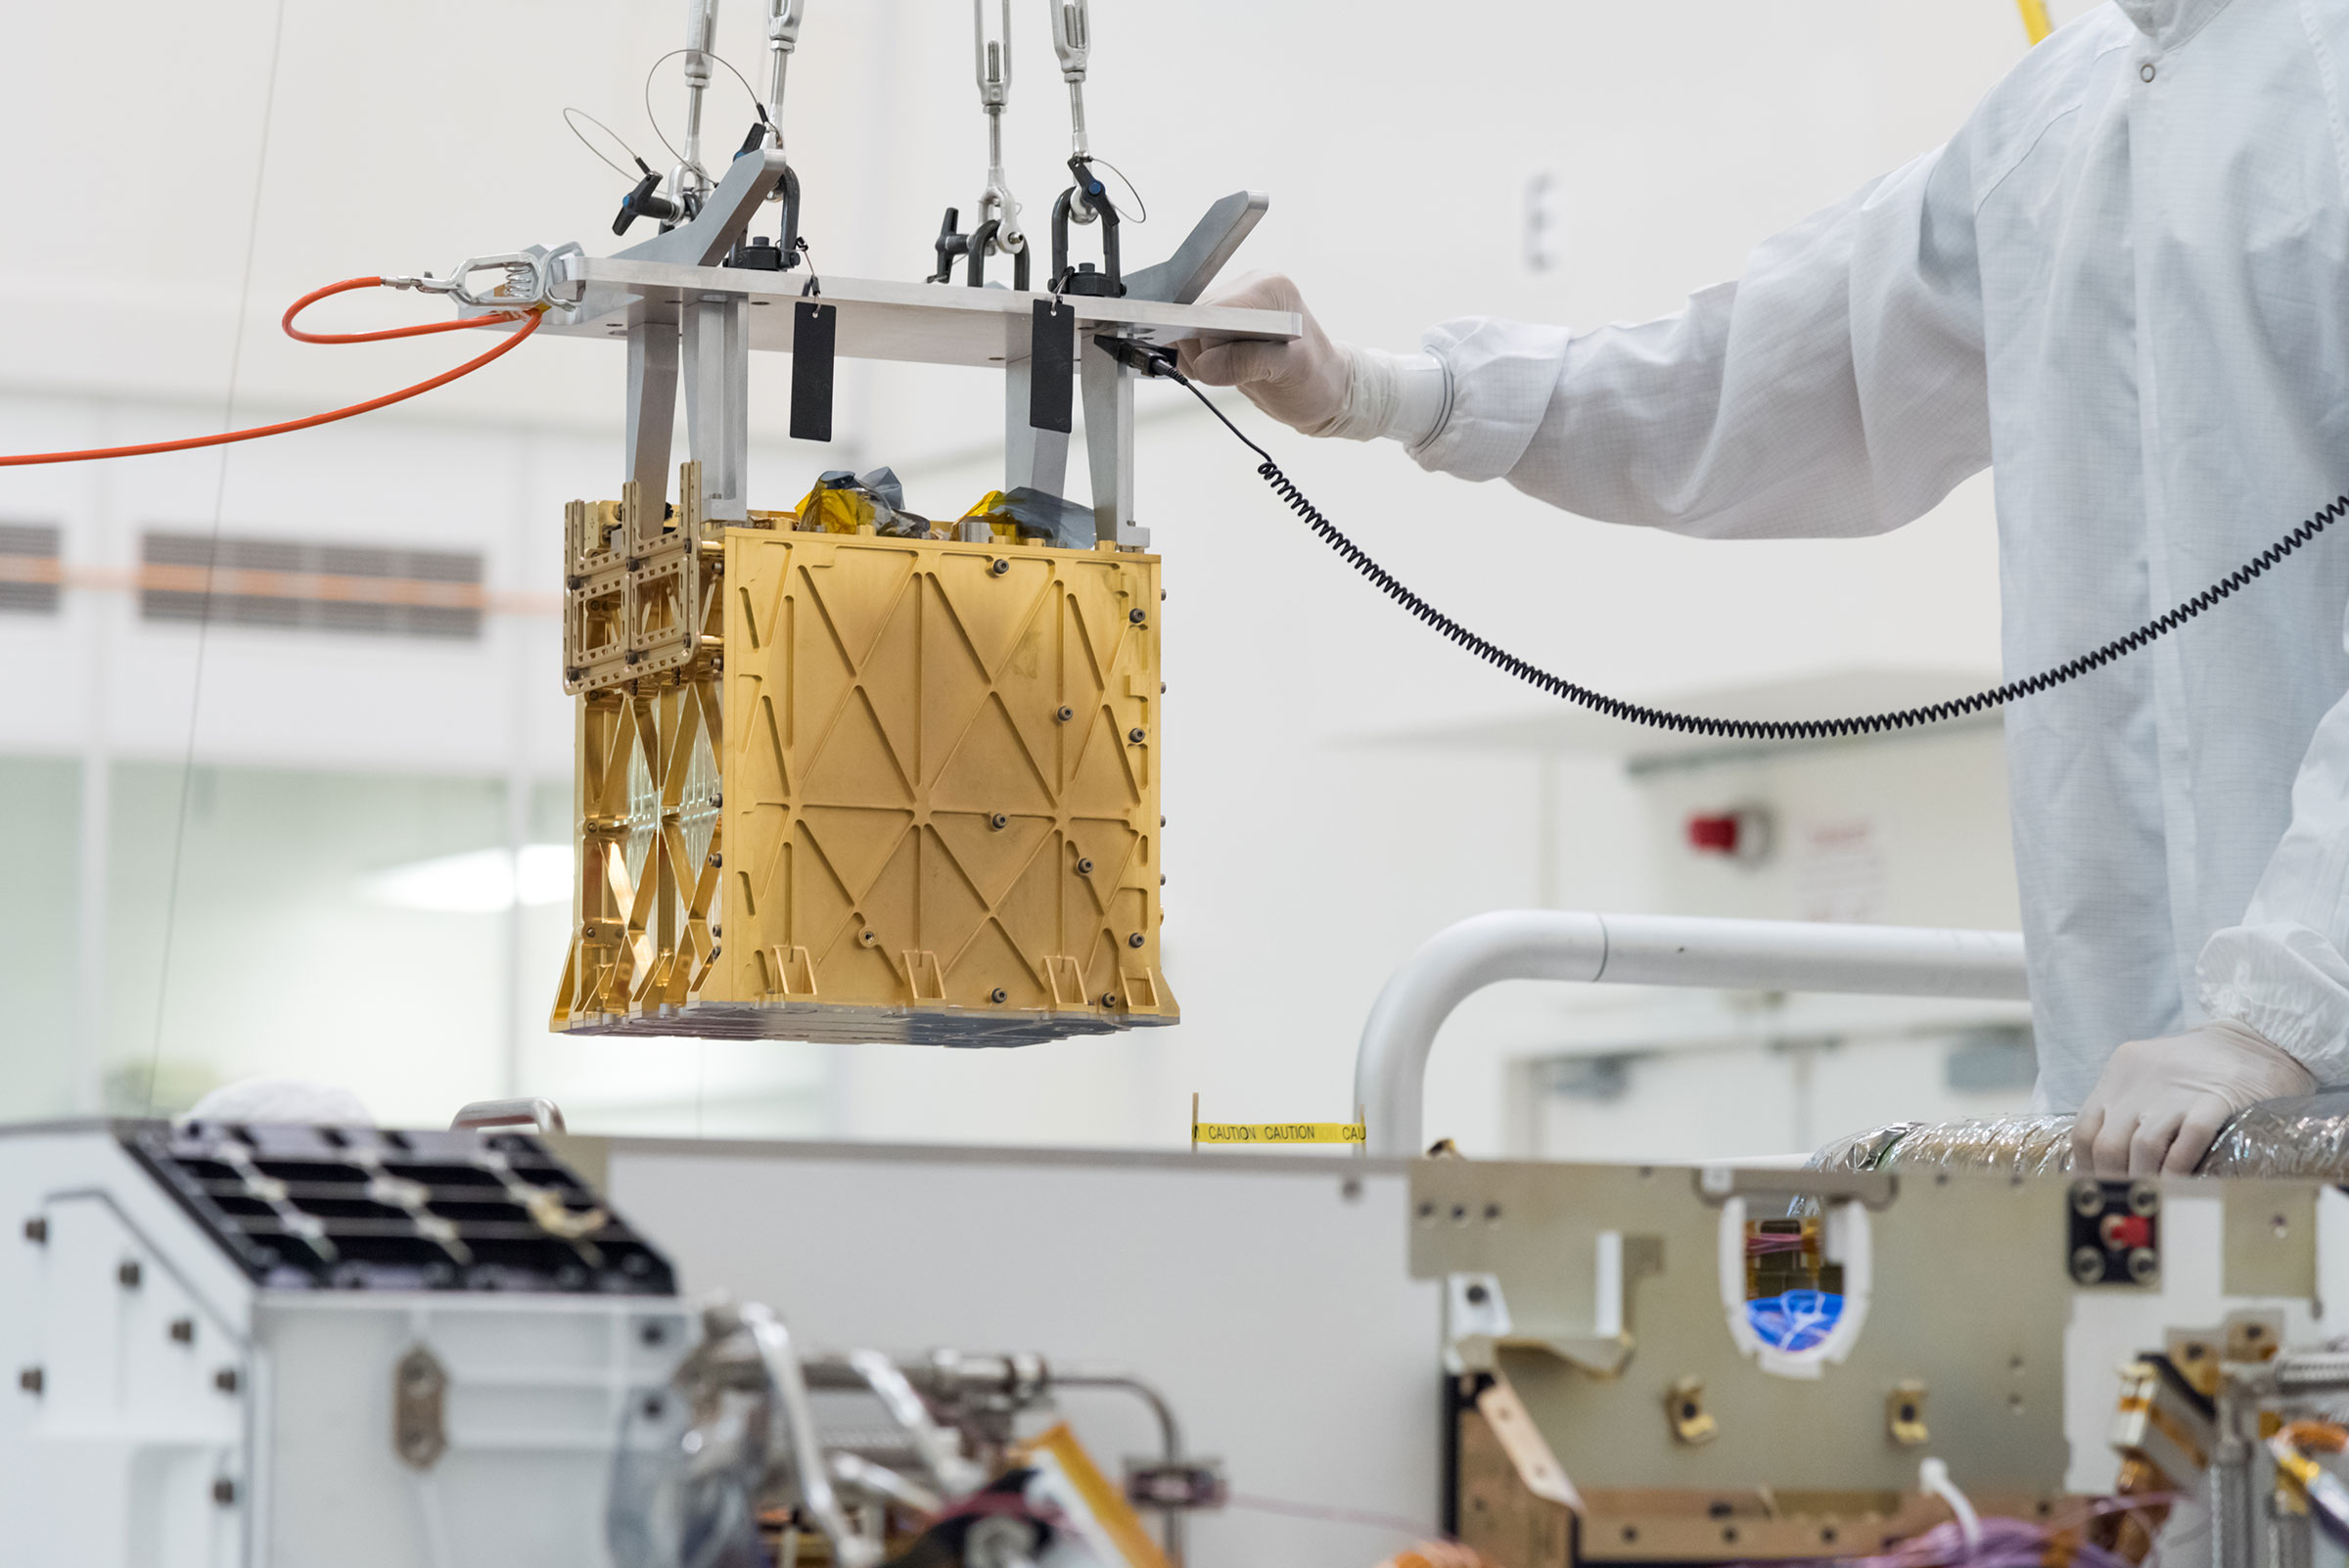 Technicians in the clean room are carefully lowering the Mars Oxygen In-Situ Resource Utilization Experiment (MOXIE) instrument into the belly of the Perseverance rover. (R. Lannom—NASA/JPL-Caltech)